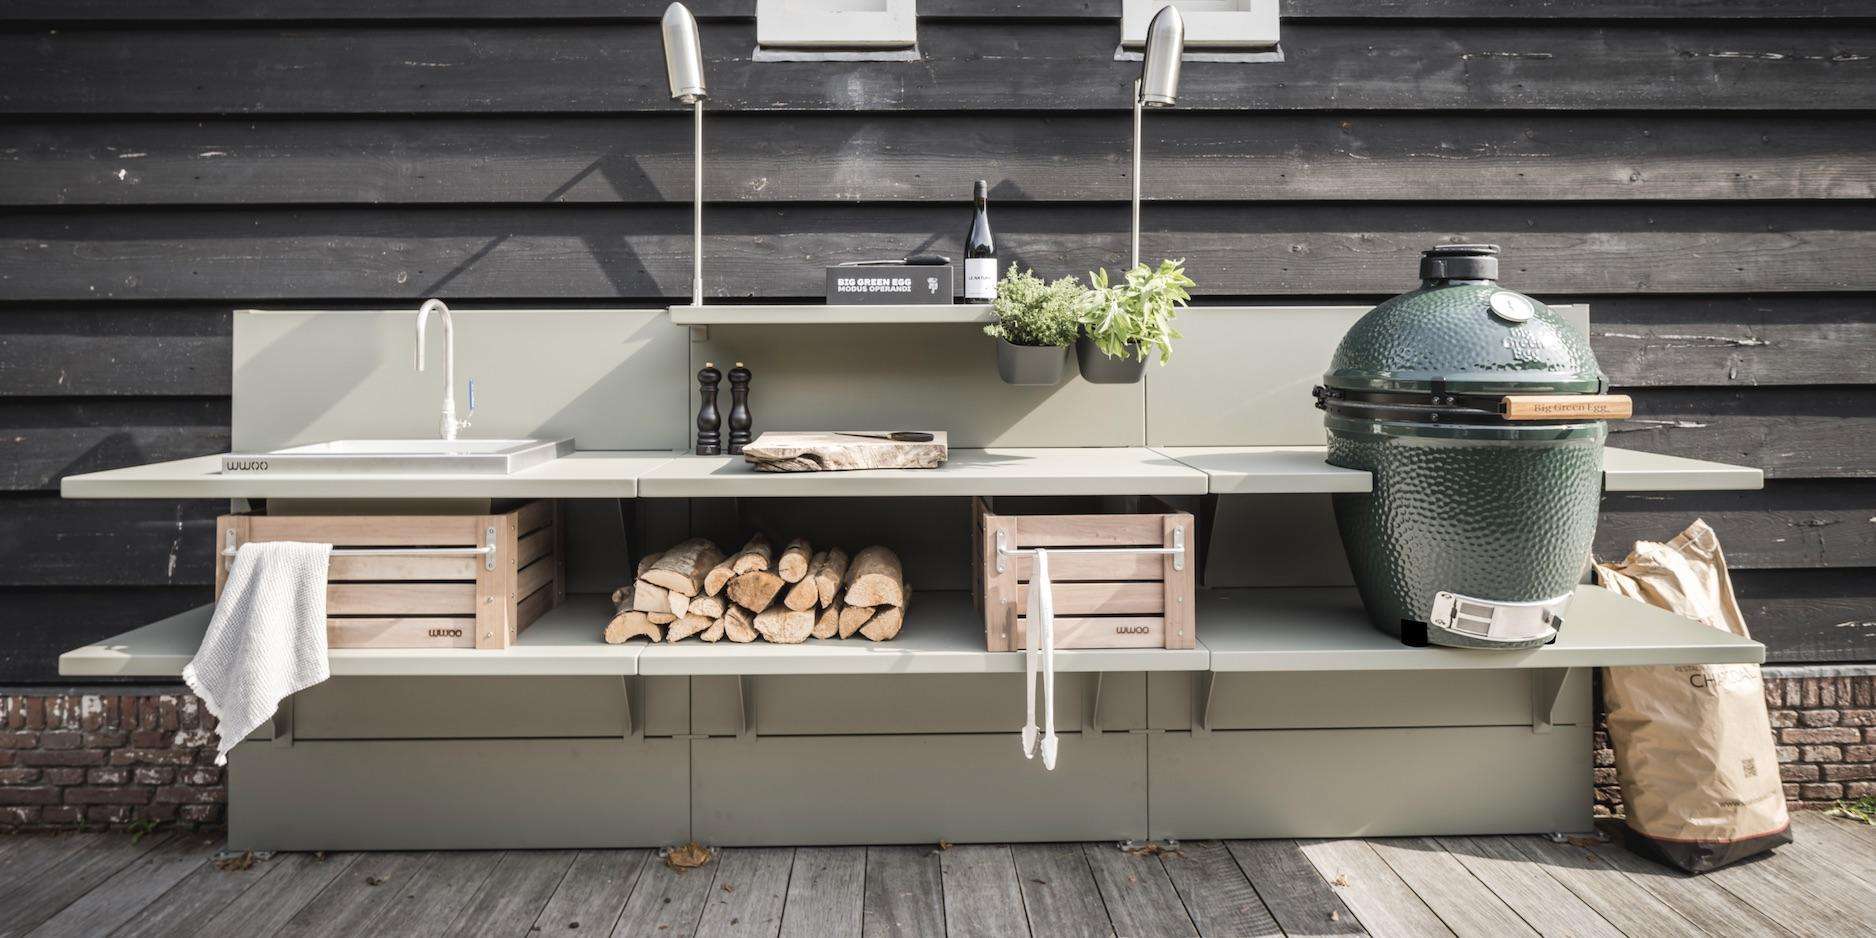 Check our brand new WWOO Steel Outdoor Kitchens!